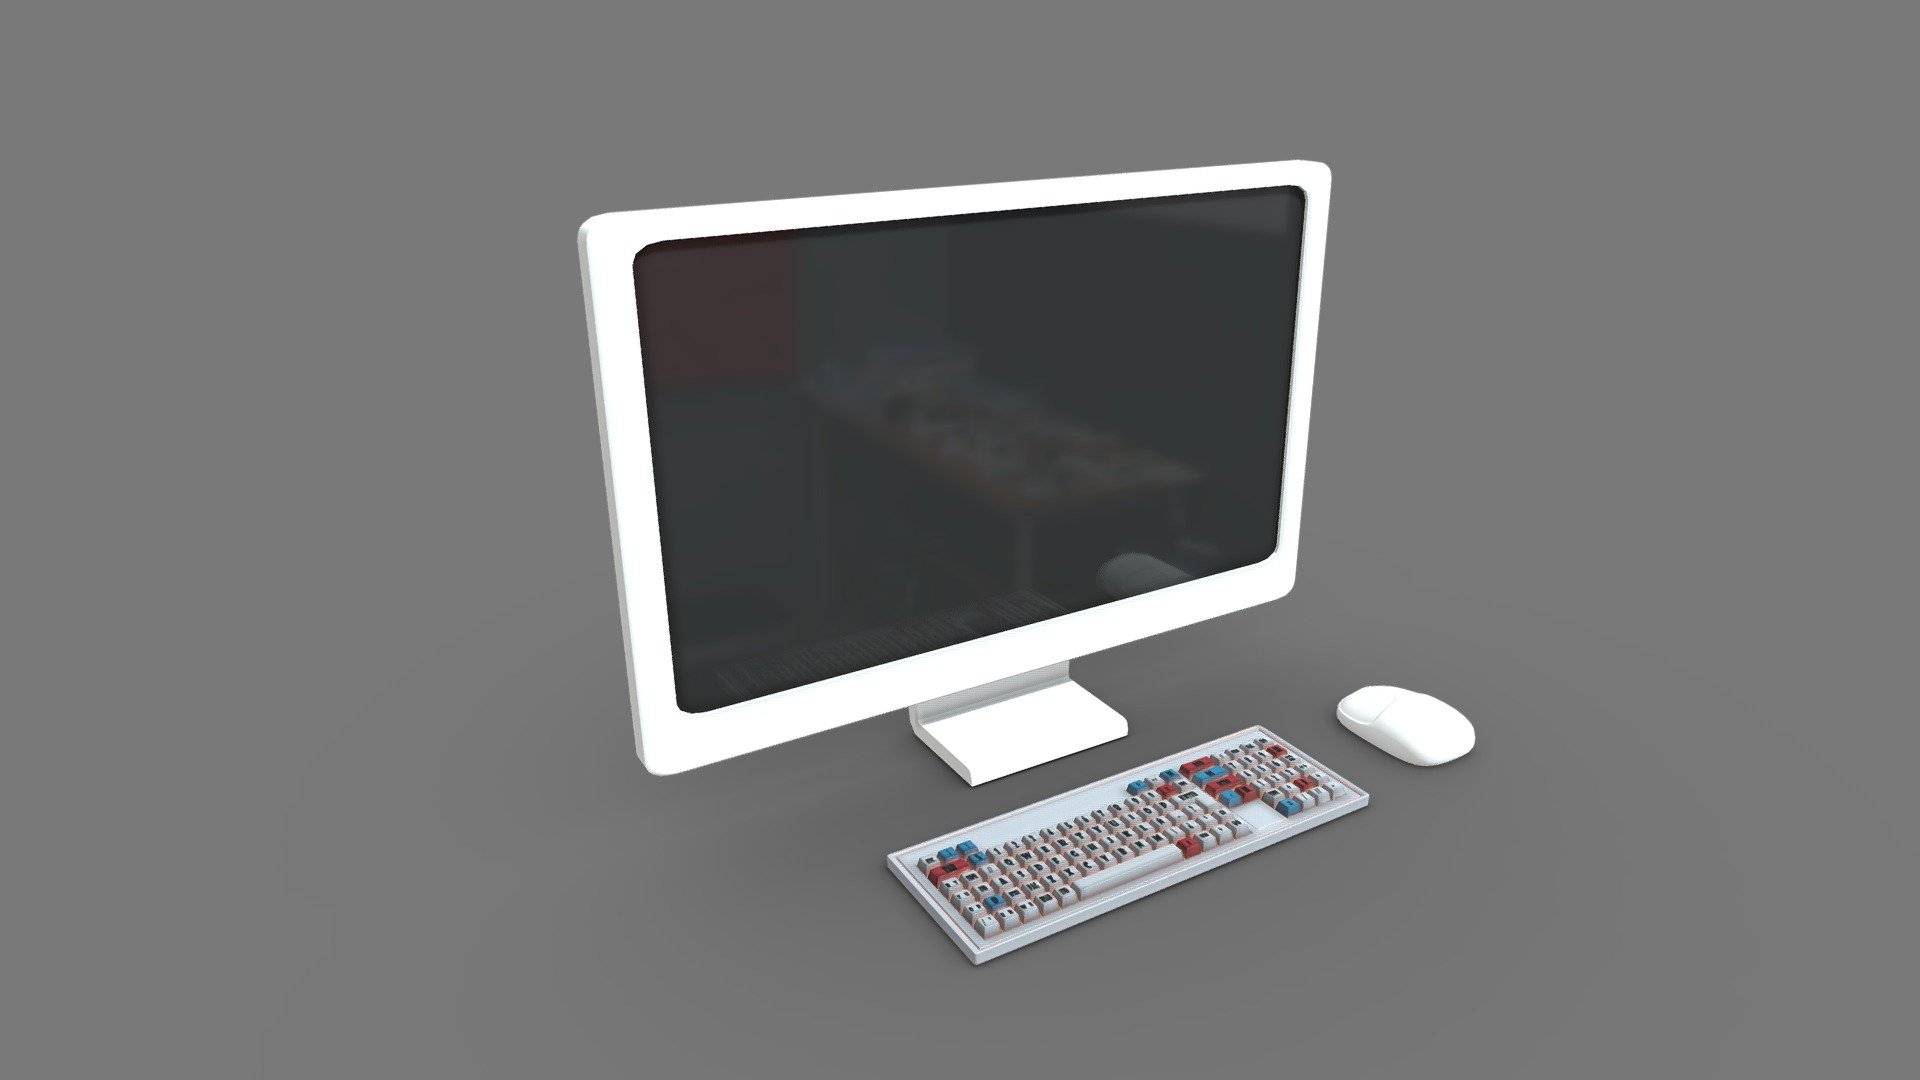 Cartoon White Computer Desktop

Files :




3DS Max 2018 Vray 3.6

Blender 3.3

Fbx

Obj

Gltf

Usdz

2 Textures _ 4k .jpeg (Color, Roughness)

Unit system is set to metric(m). The dimensions are real

Any questions or comments about the model, you can write to me. I will be happy to assist you :) - Cartoon White Computer Desktop - Buy Royalty Free 3D model by 3D Figures (@3DFigures) 3d model